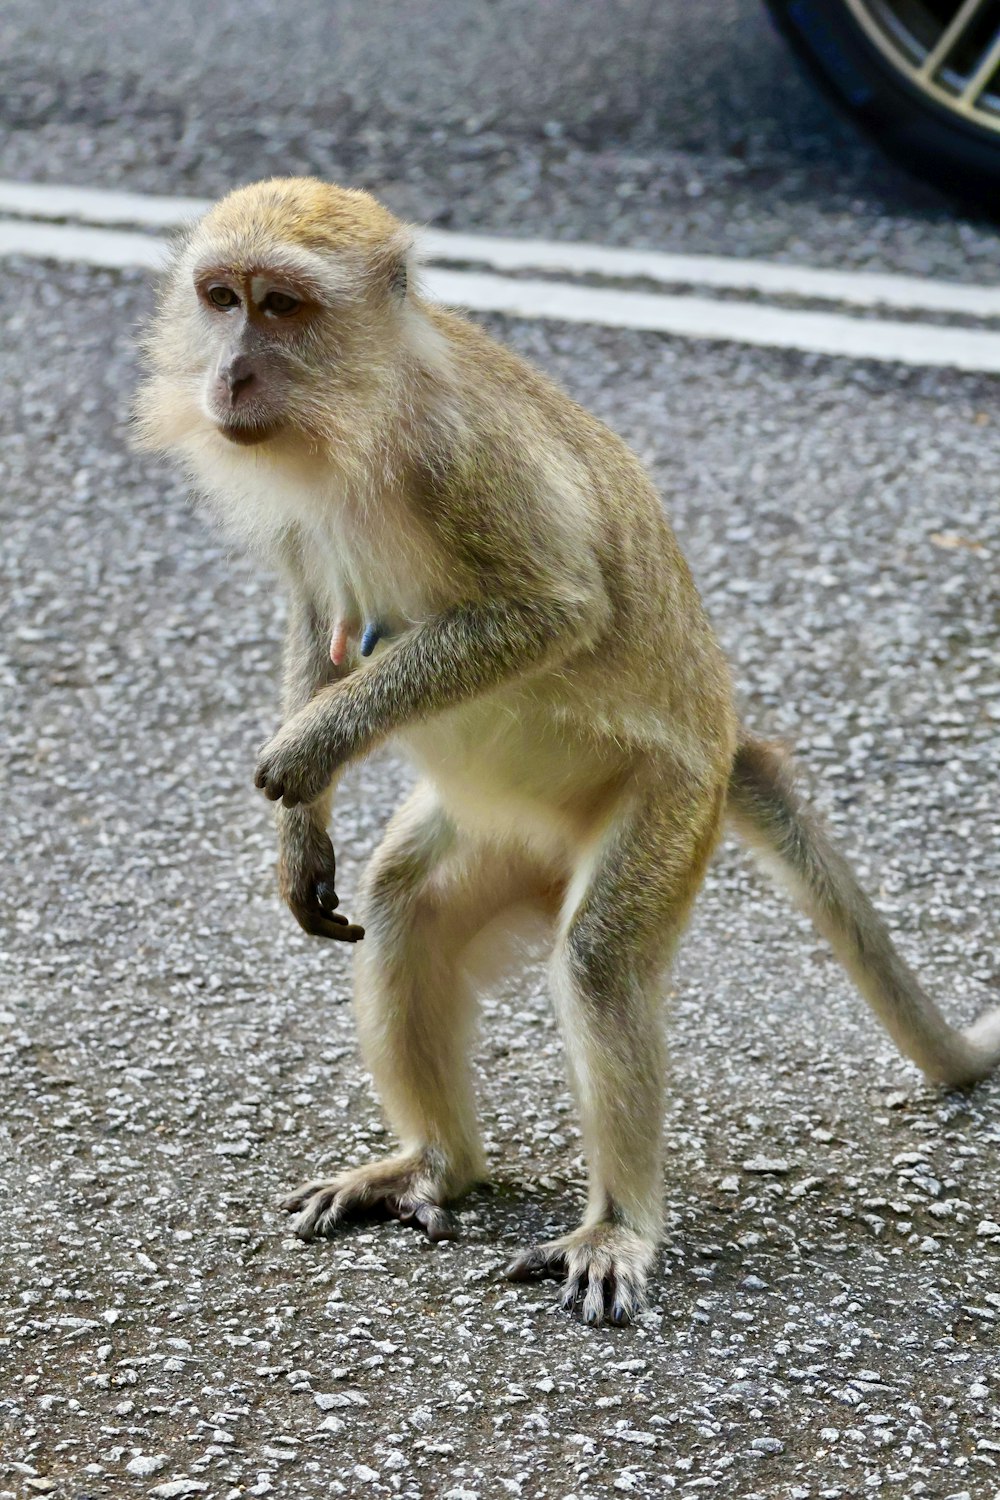 a small monkey standing on its hind legs